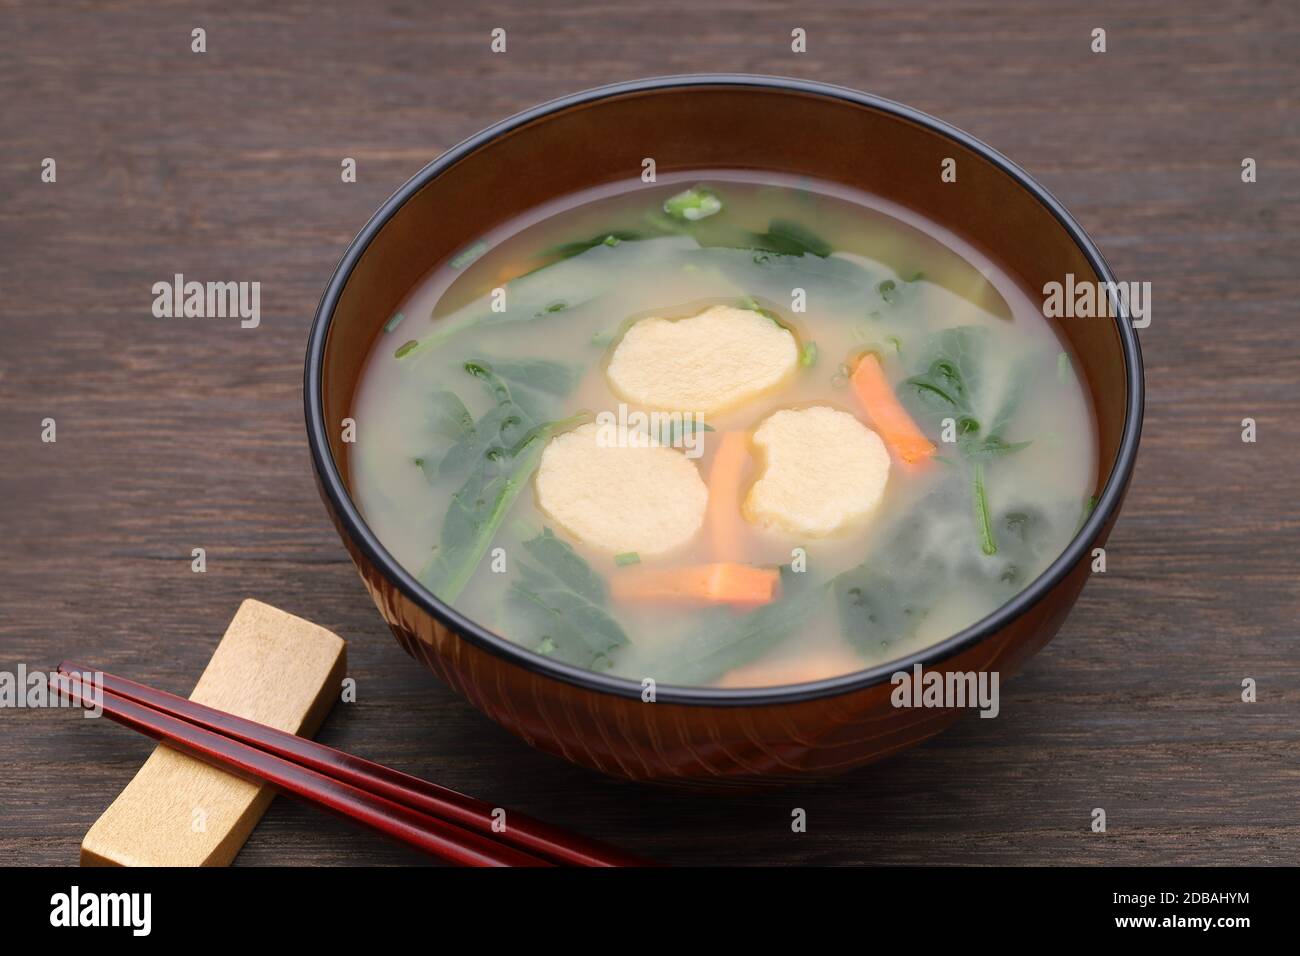 Japanese food, Miso soup of fu and vegetables in a bowl on table Stock Photo